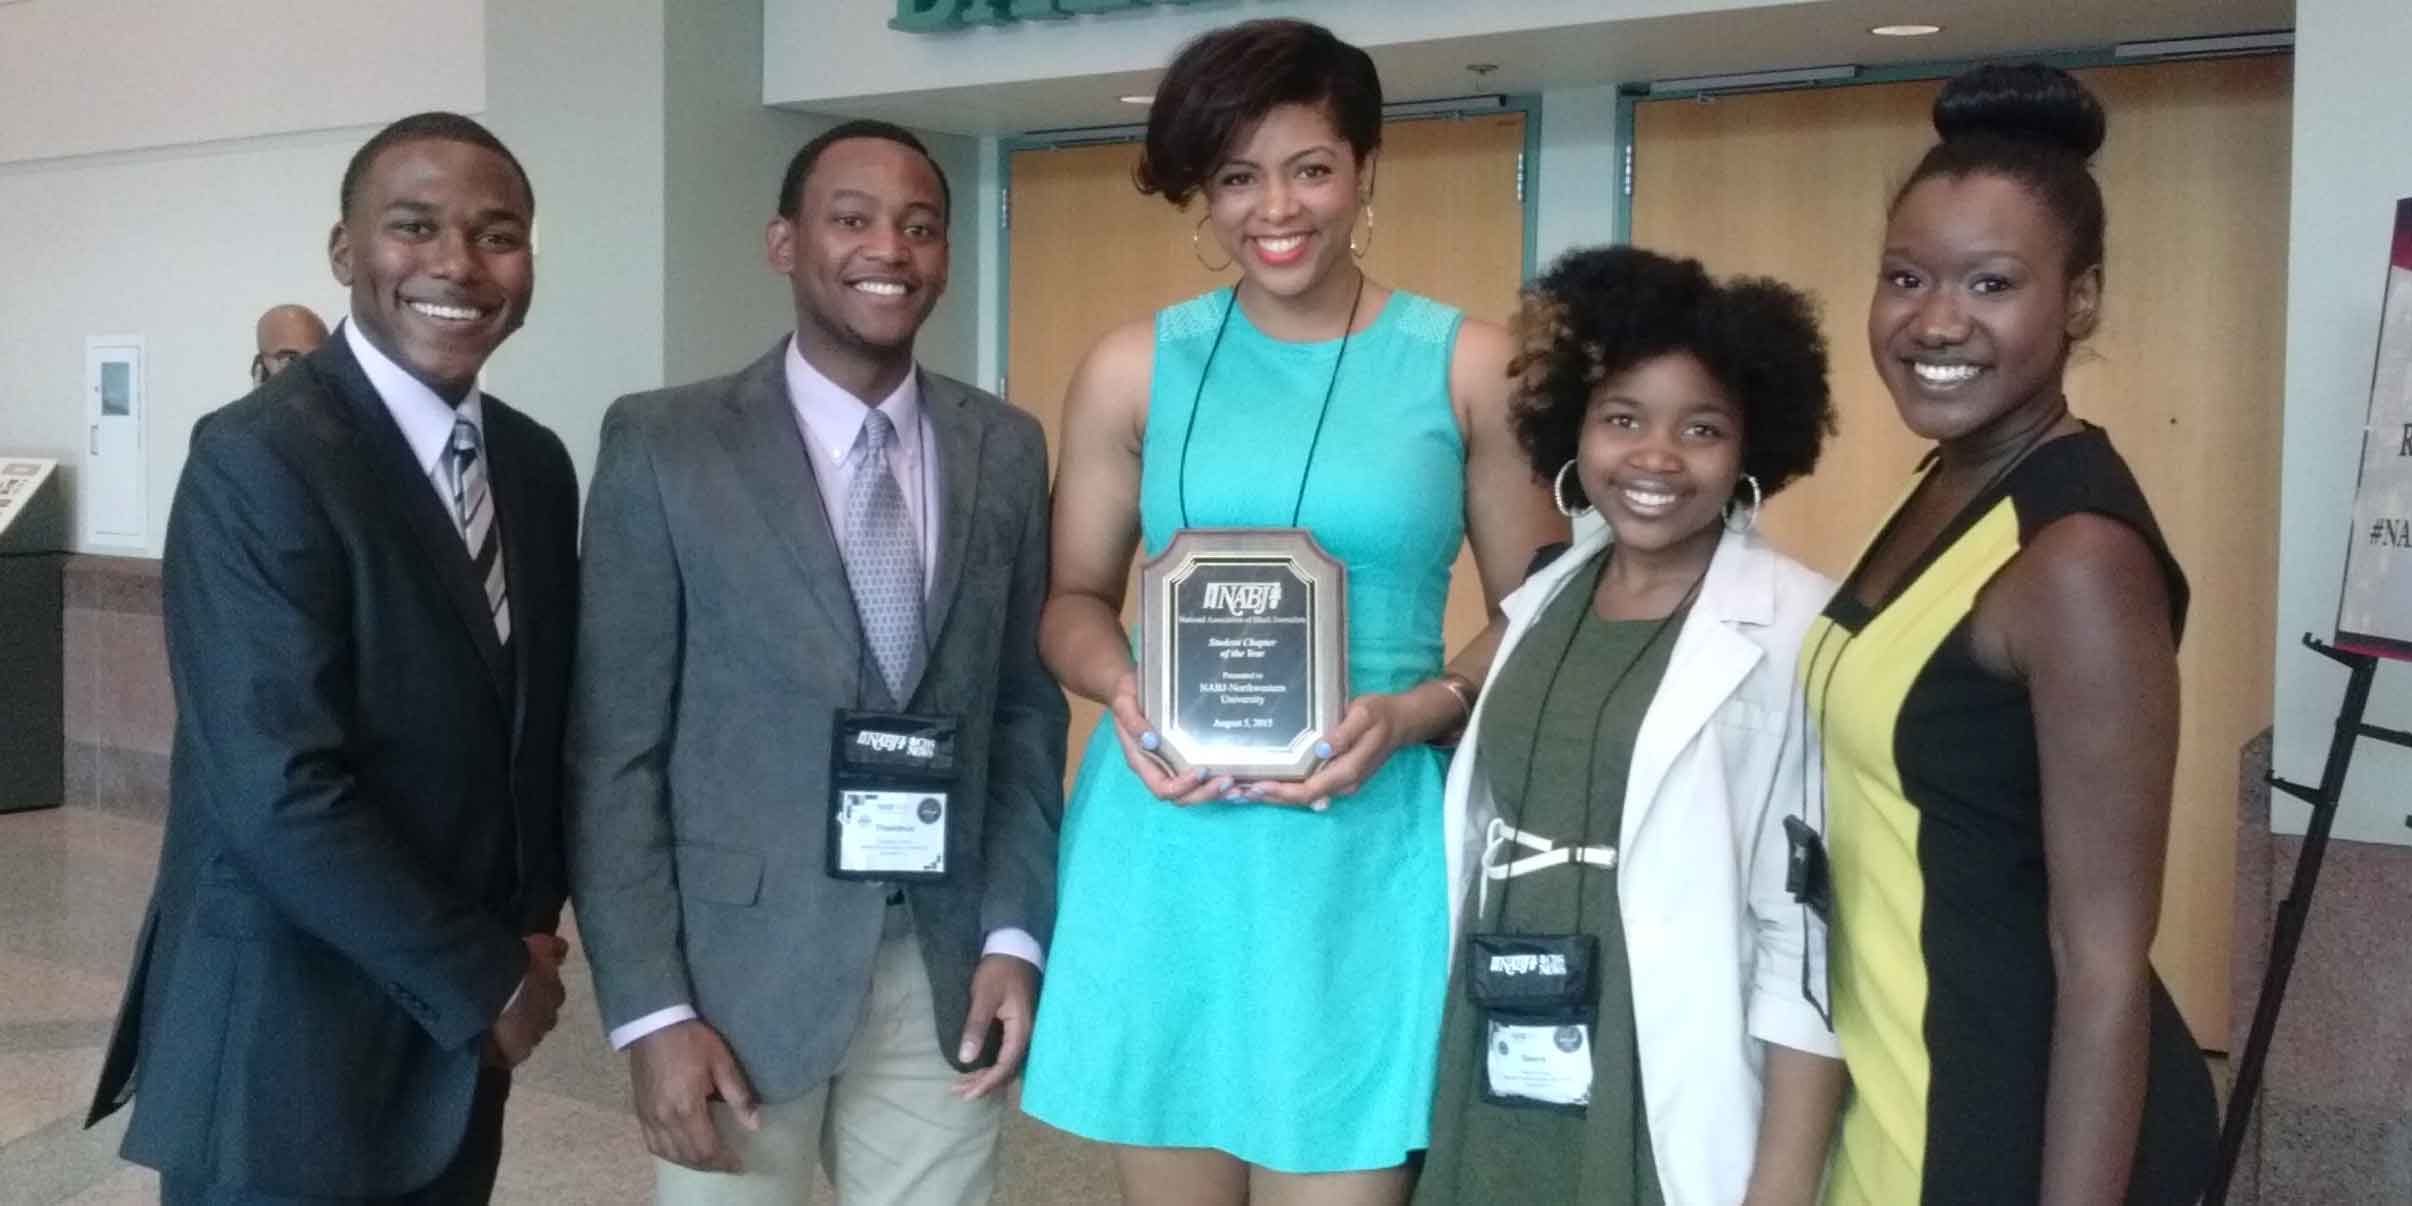 Northwestern's NABJ chapter received "Chapter of the Year" honors at the national NABJ convention